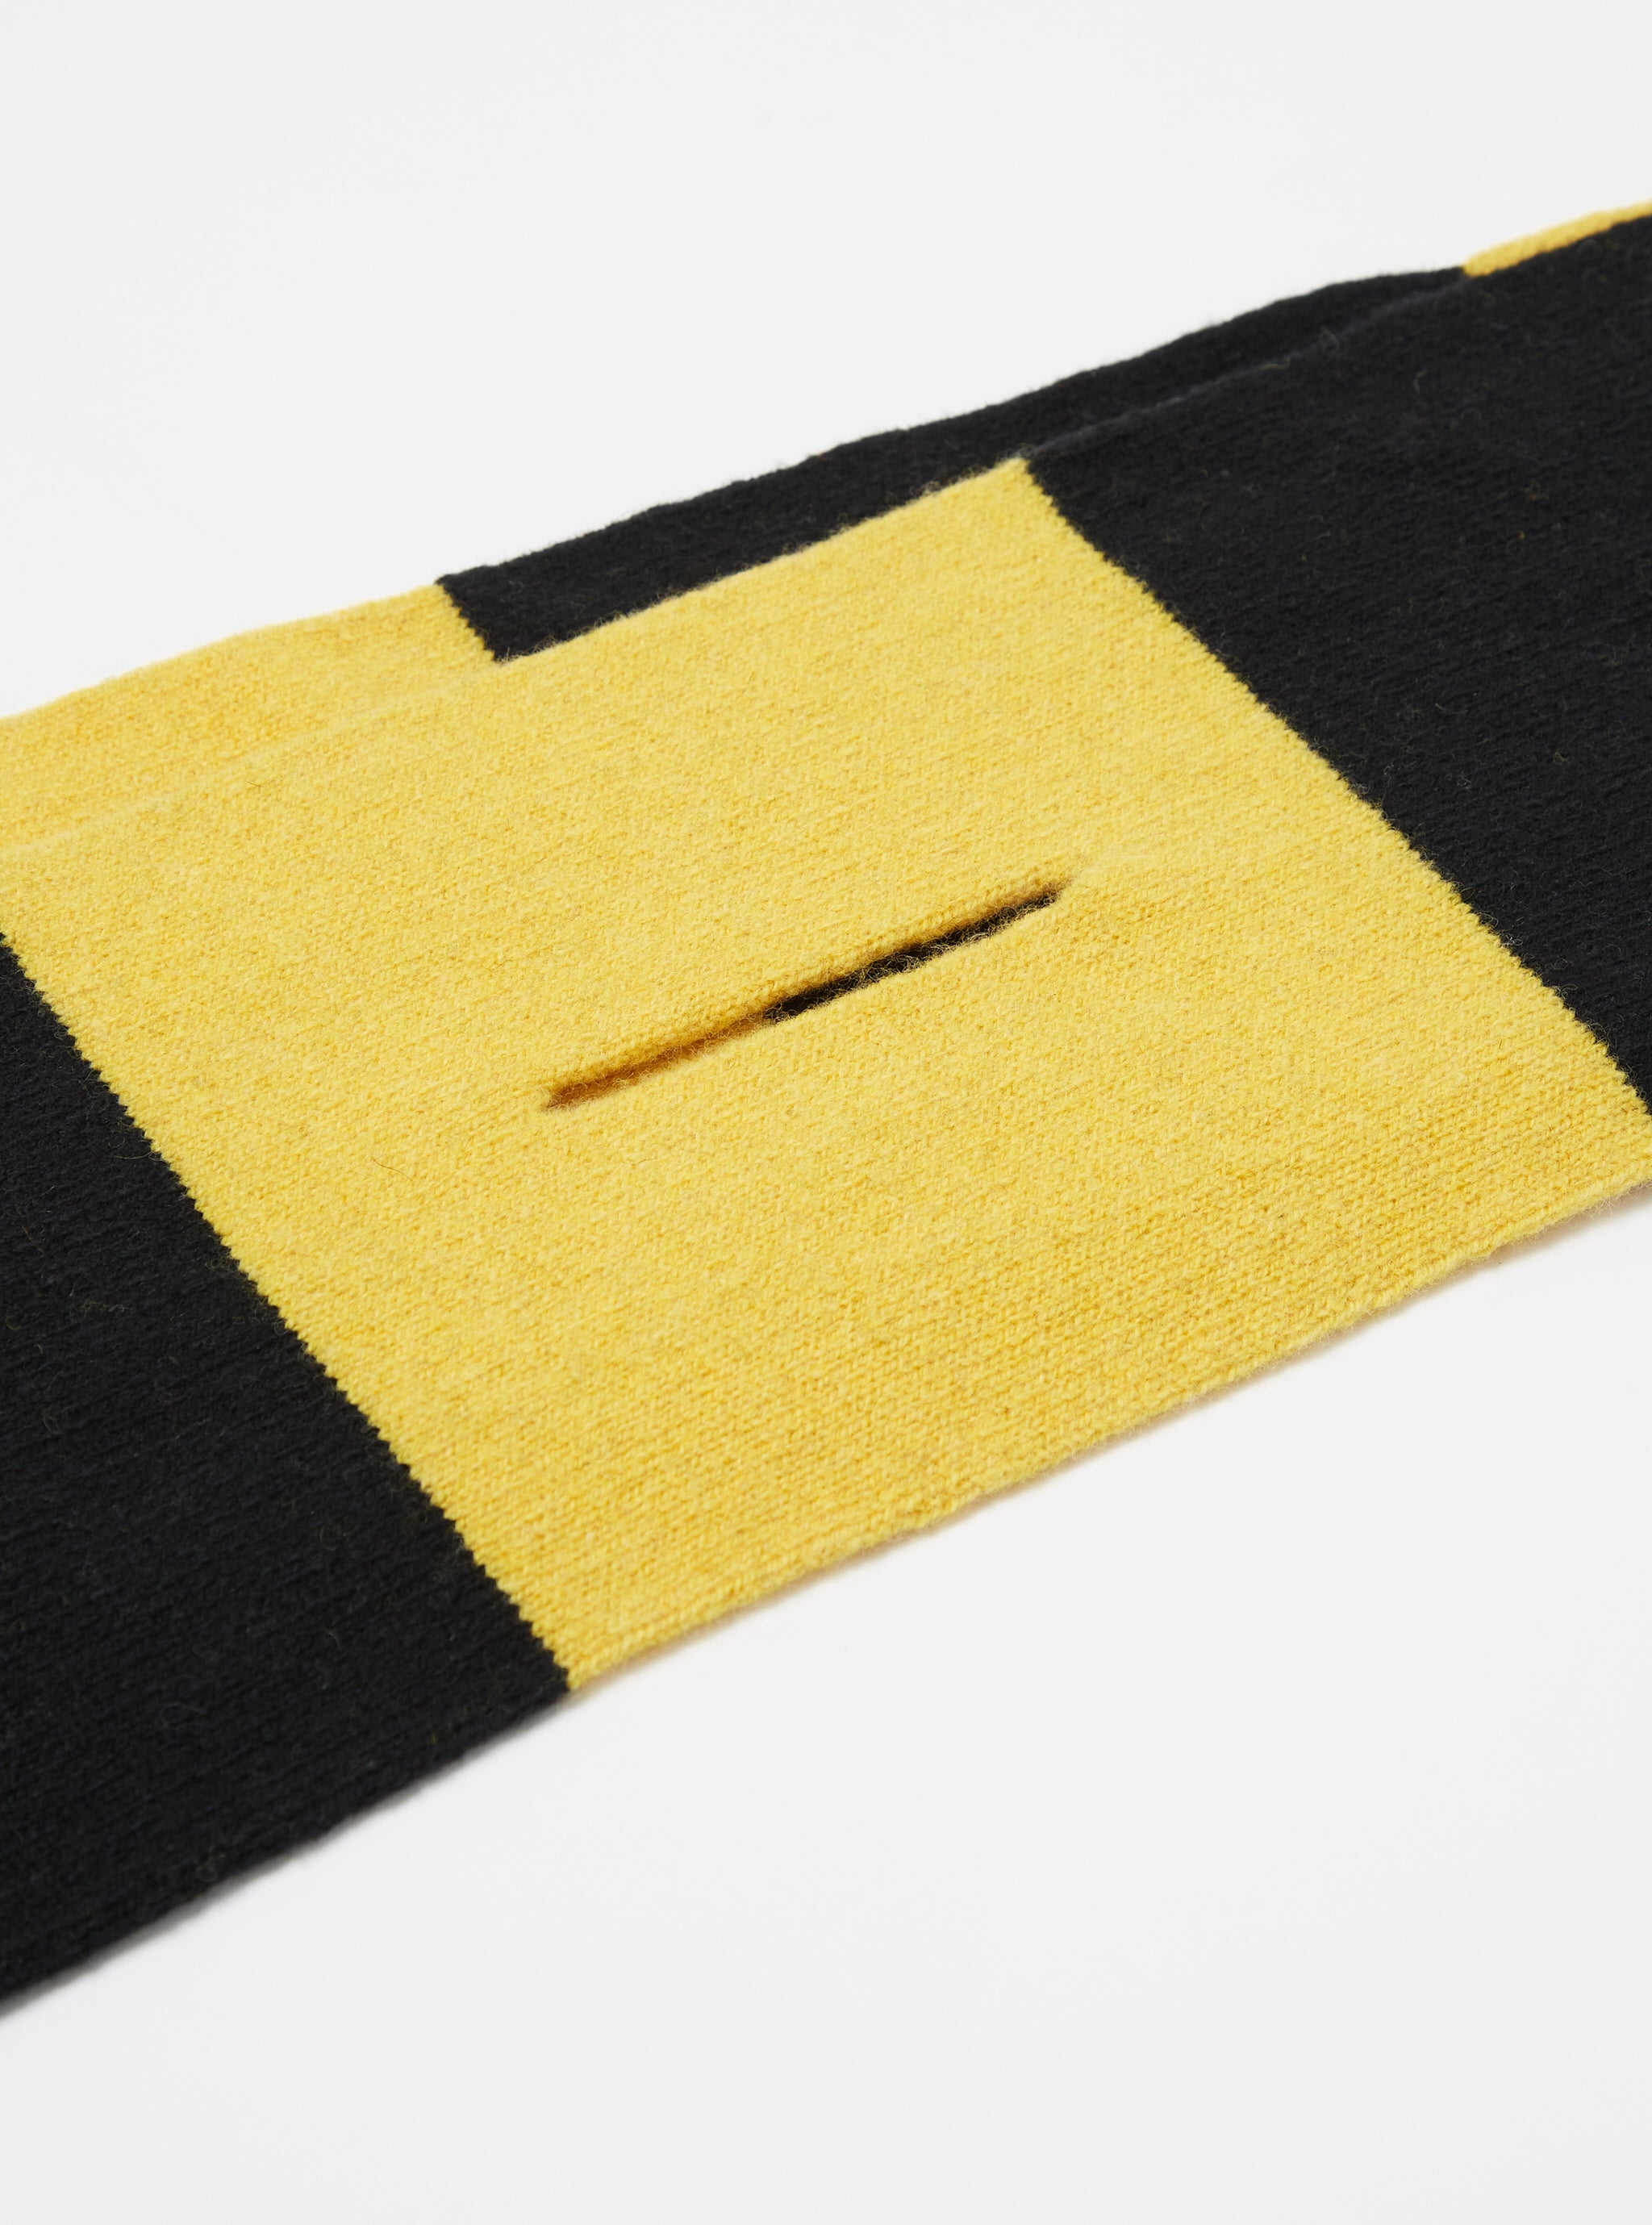 Universal Works Deluxe Football Scarf in Black/Yellow Soft Wool